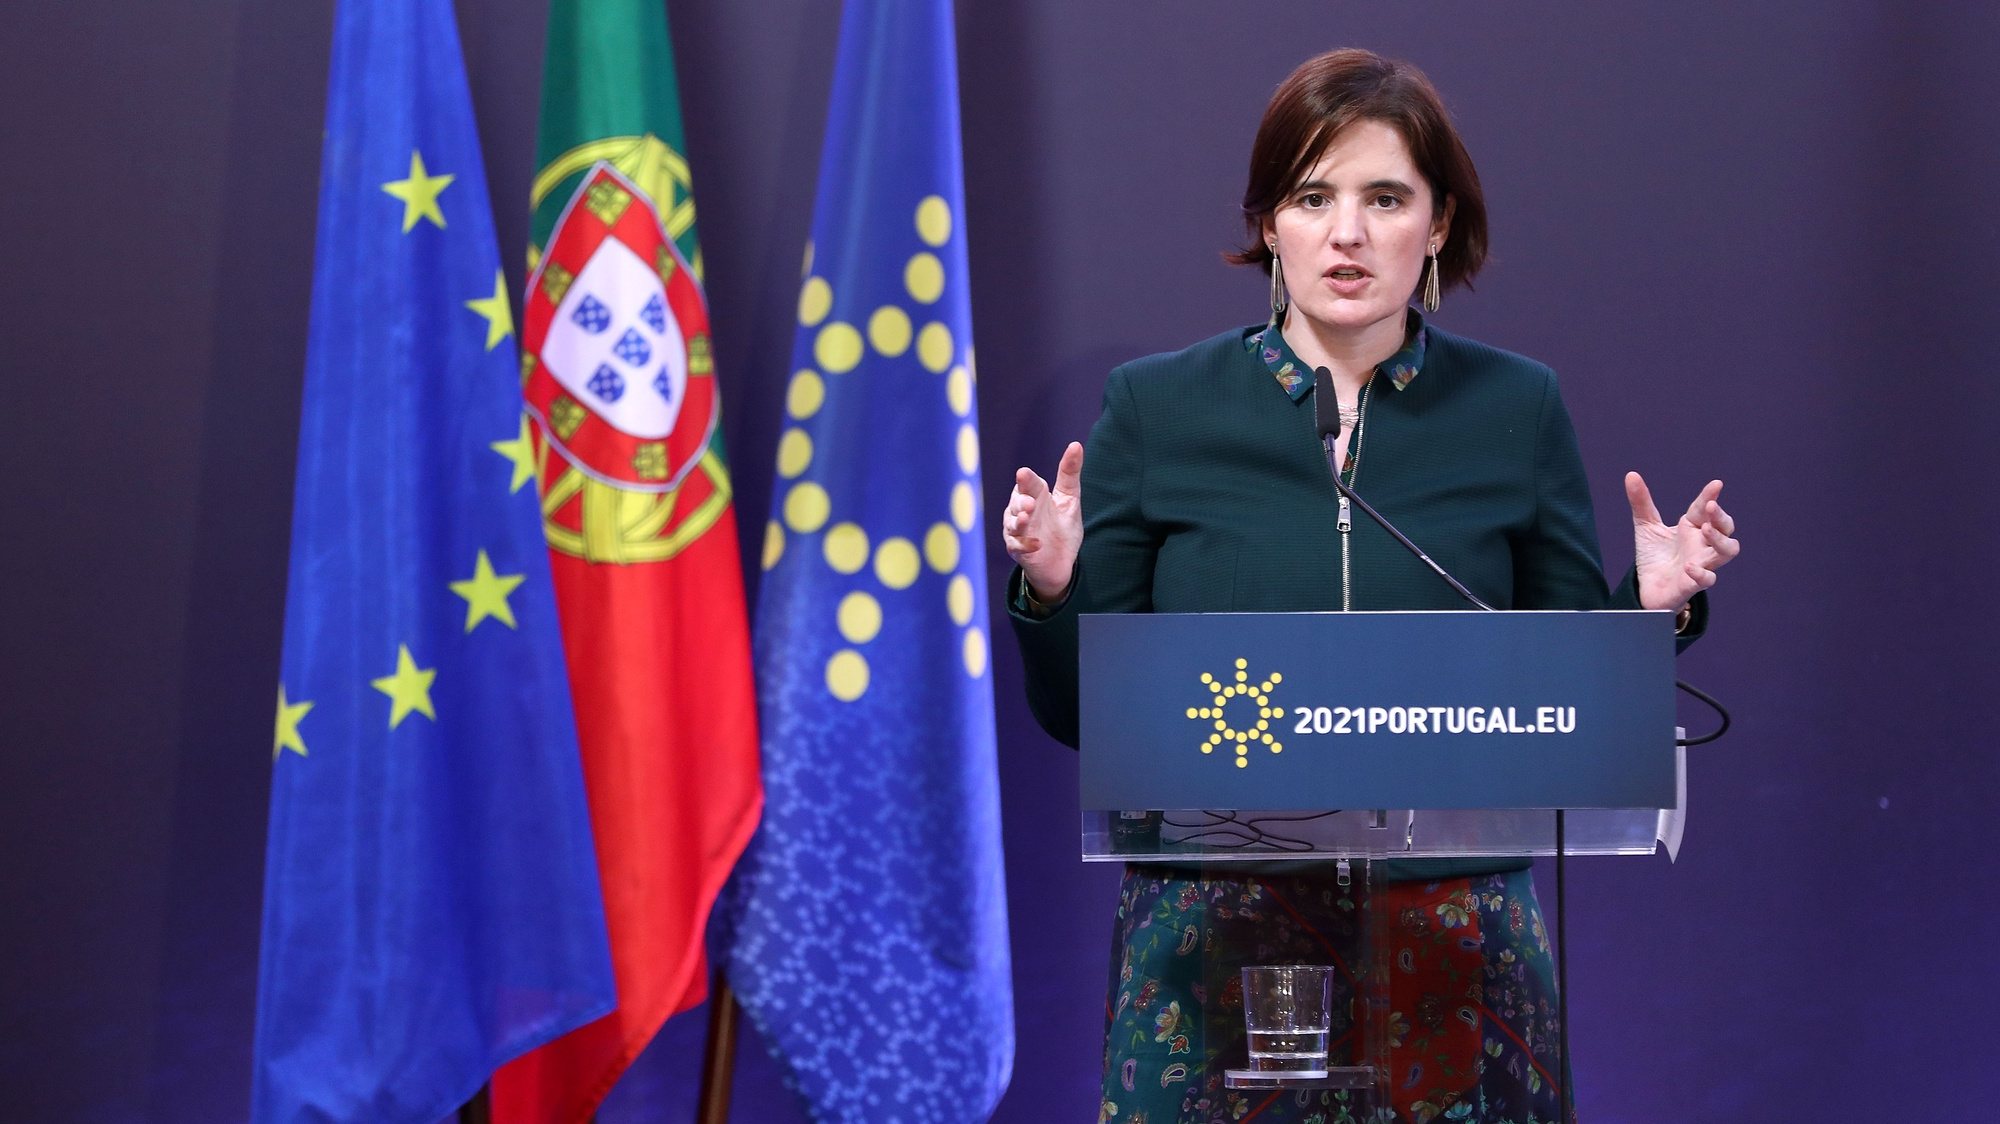 Portuguese Minister of State for the Presidency, Mariana Vieira da Silva, attends a press conference after a Informal video conference of Ministers for Employment, Social Policy, Health and Consumer Affairs (EPSCO) under the theme “Jobs, Qualifications and Cohesion: Priorities of a Stronger Social Europe”, in Lisbon, Portugal, 22 February 2021. The purpose of these talks was for the Member States to be able to present their contributions and share their ambitions regarding the Action Plan on the Implementation of the European Pillar of Social Rights, which will be presented to by the European Commission in March. ANTONIO PEDRO SANTOS/LUSA